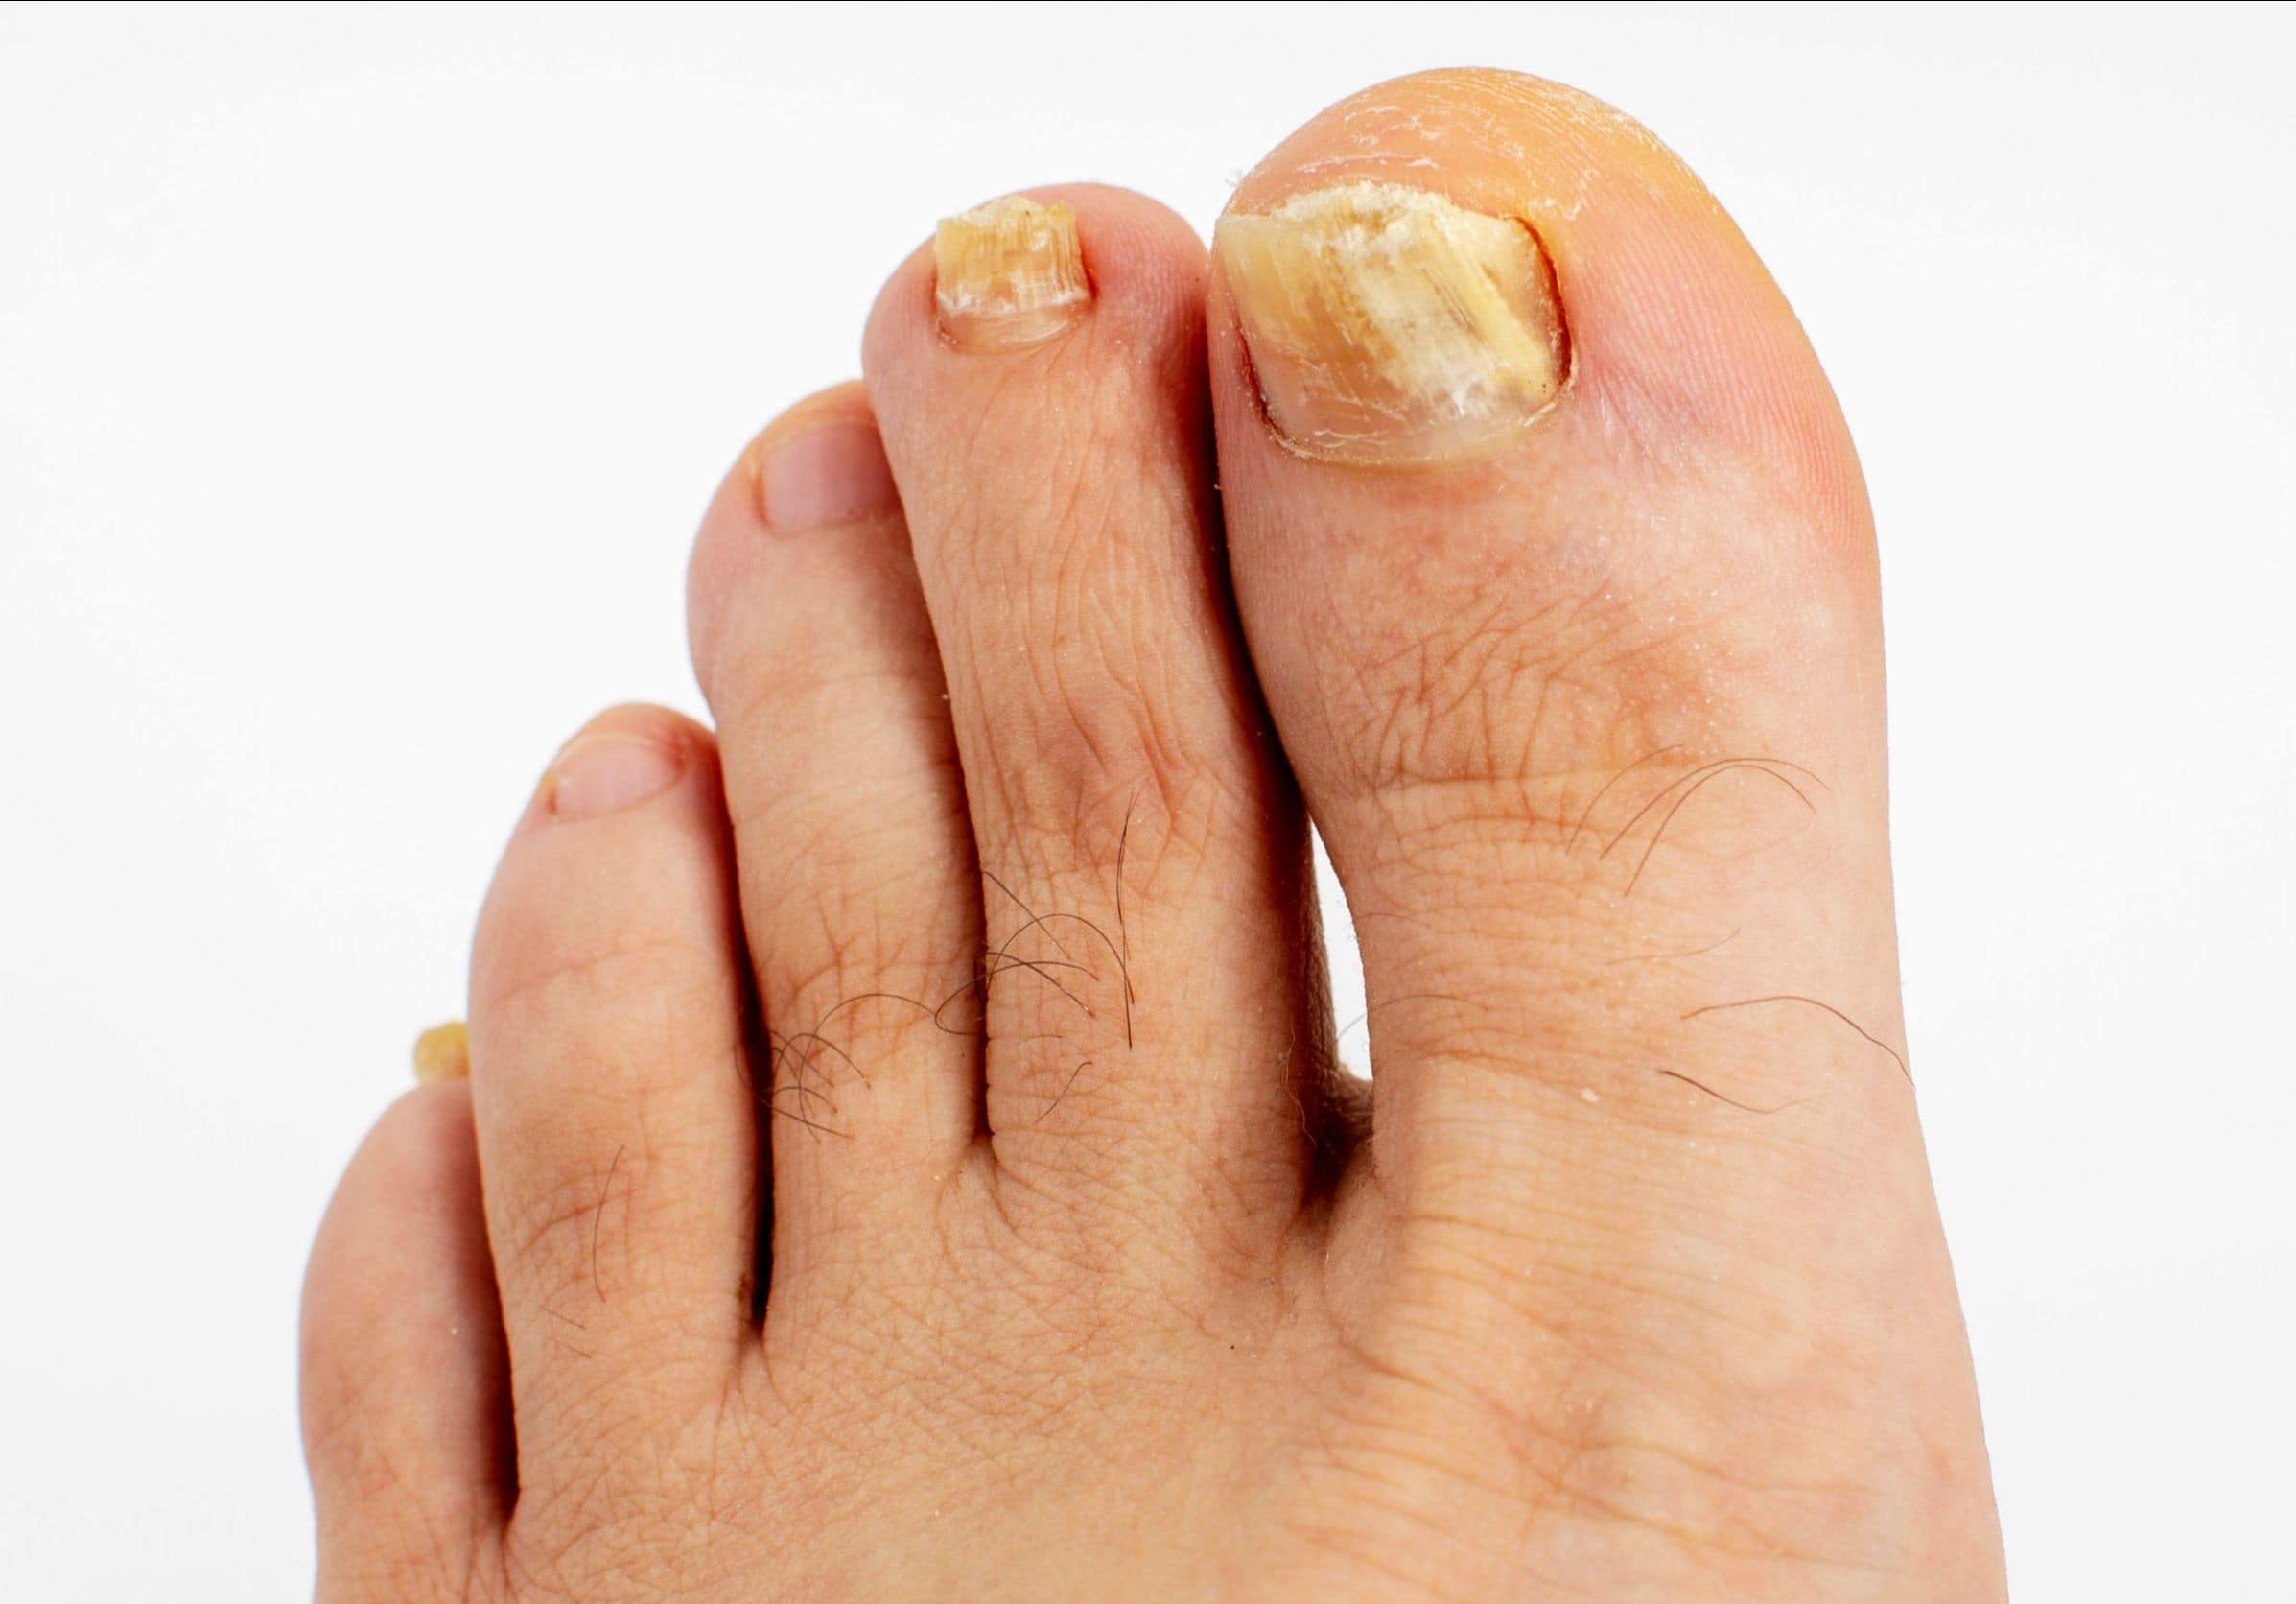 Nail Fungus – Causes and Treatment for Nail Fungus - DFW Foot and Ankle  Care - Dr. Zubeen Mistry